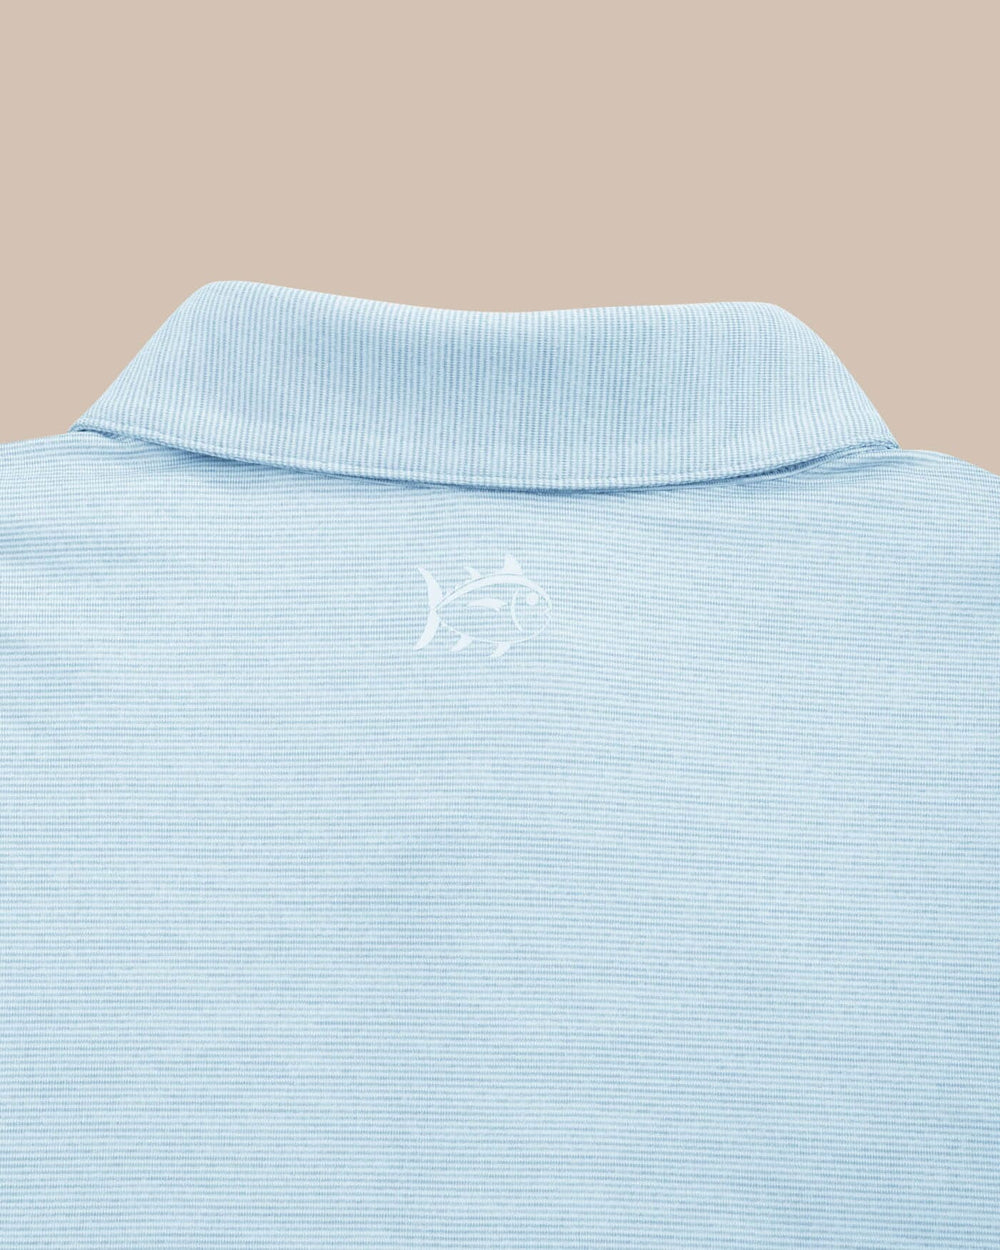 The yoke view of the Team Colors Driver Spacedye Polo Shirt by Southern Tide - Rush Blue